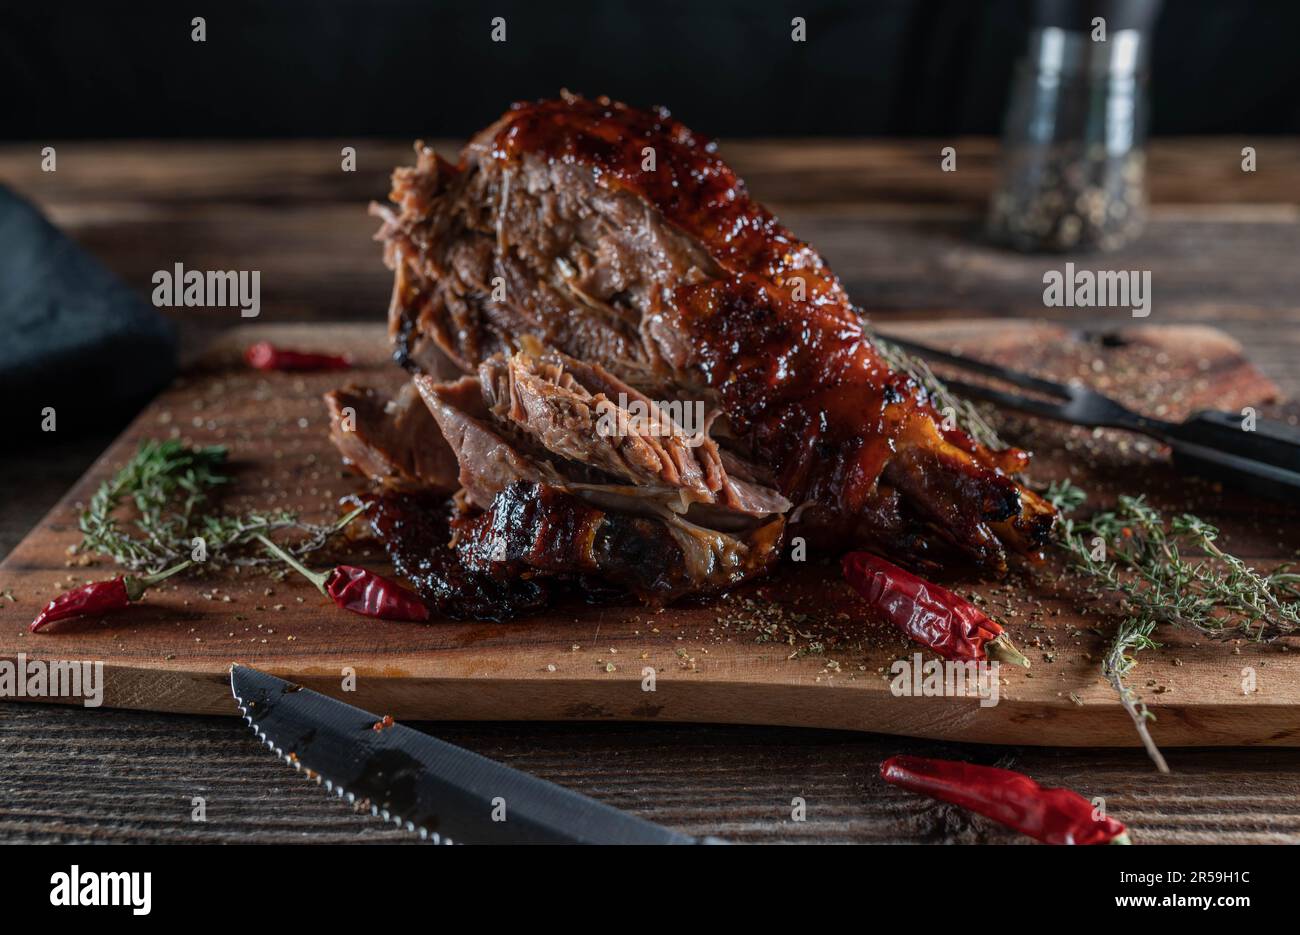 Grilled turkey leg on wooden board. Delicious barbecue meat Stock Photo